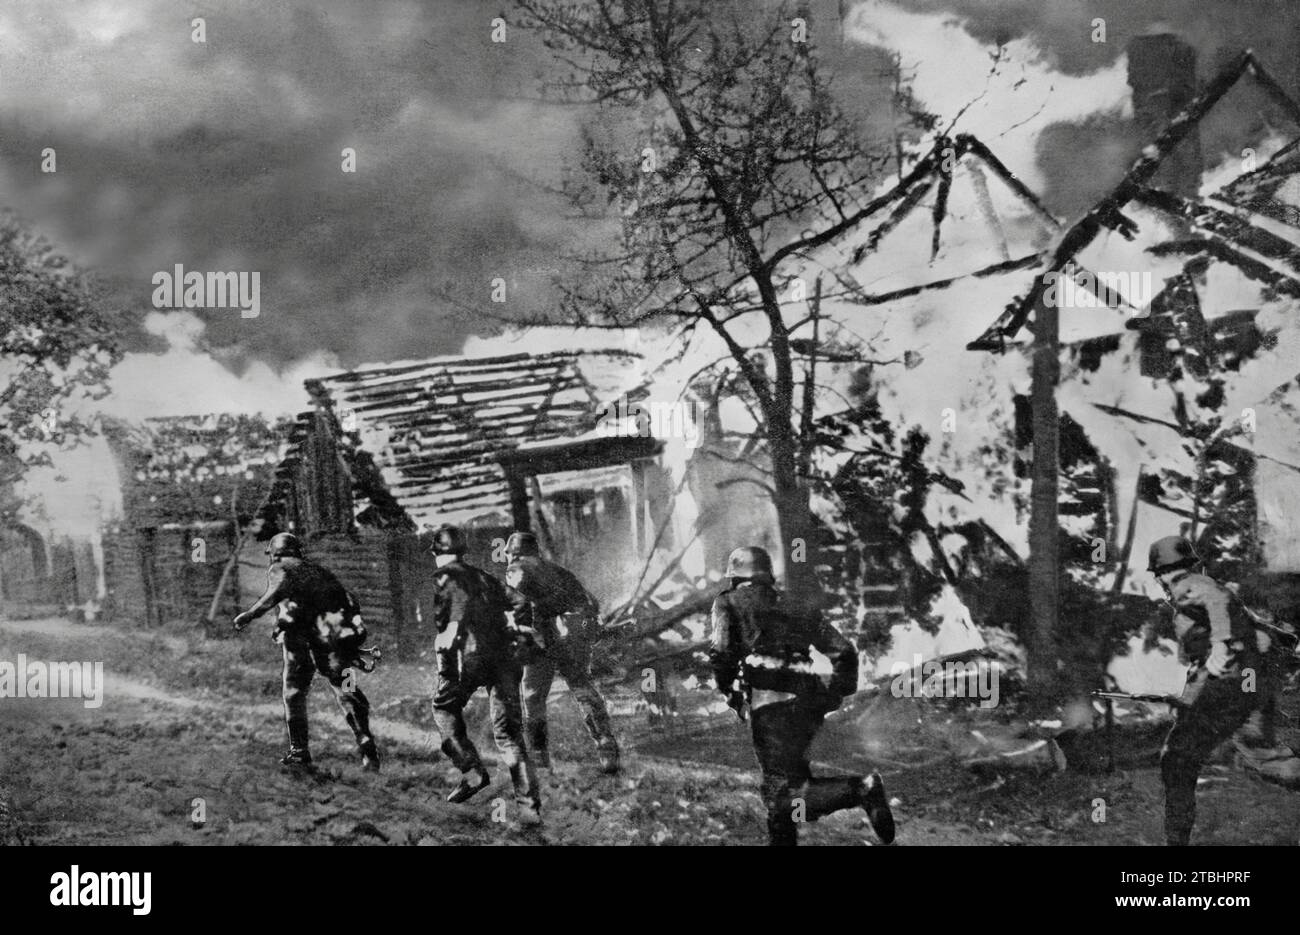 Soldiers of the Wermacht advancing past a blazing Russian village in September 1941 during the German invasion of Russia in the Second World War. Stock Photo